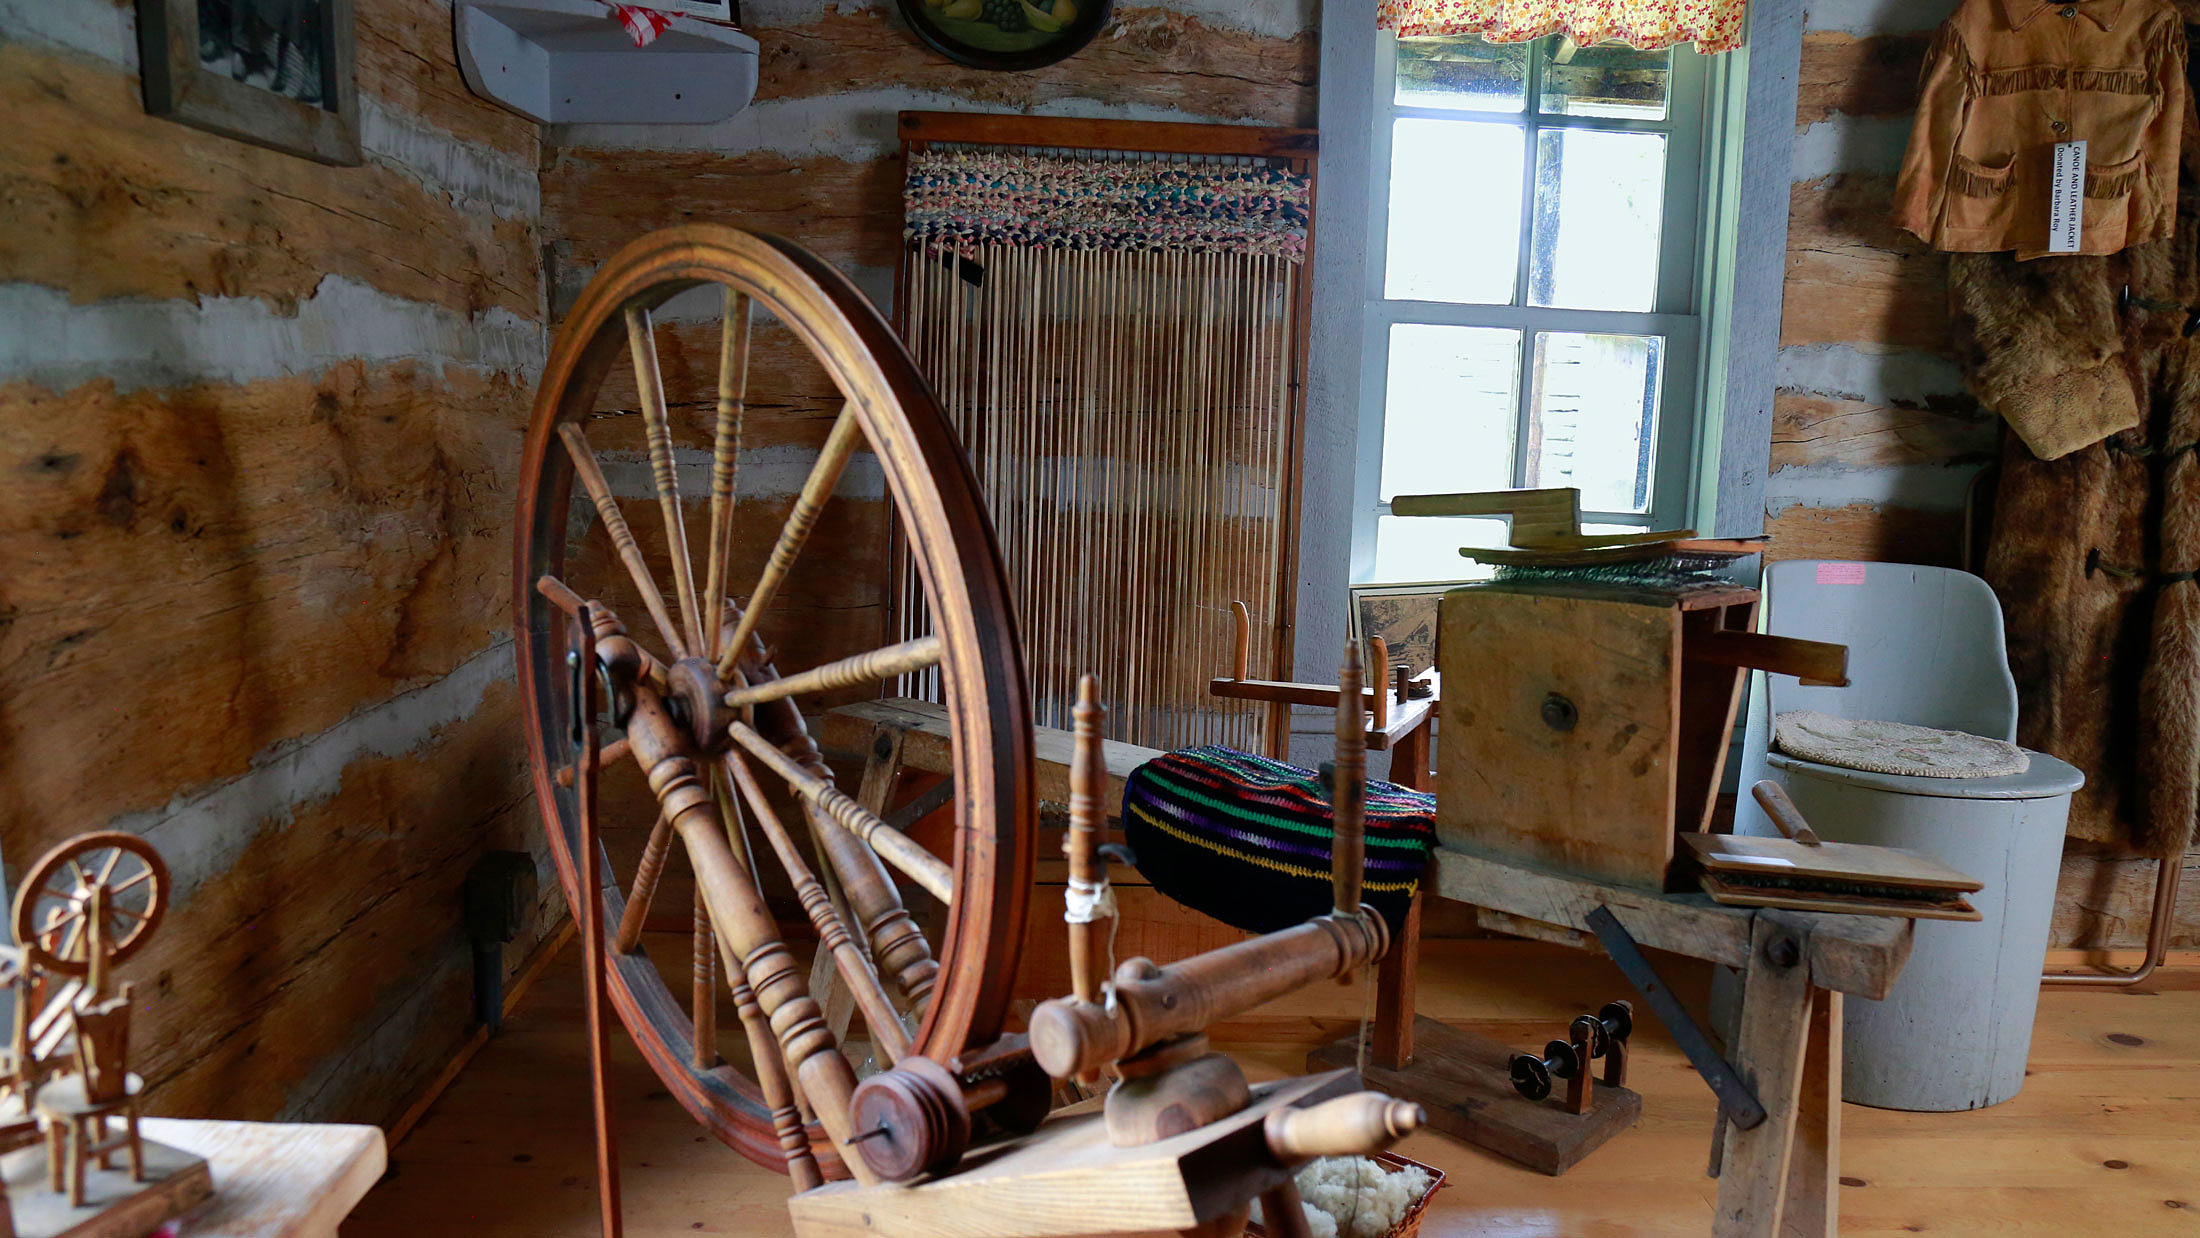 Interior view of a log cabin with spinning wheel